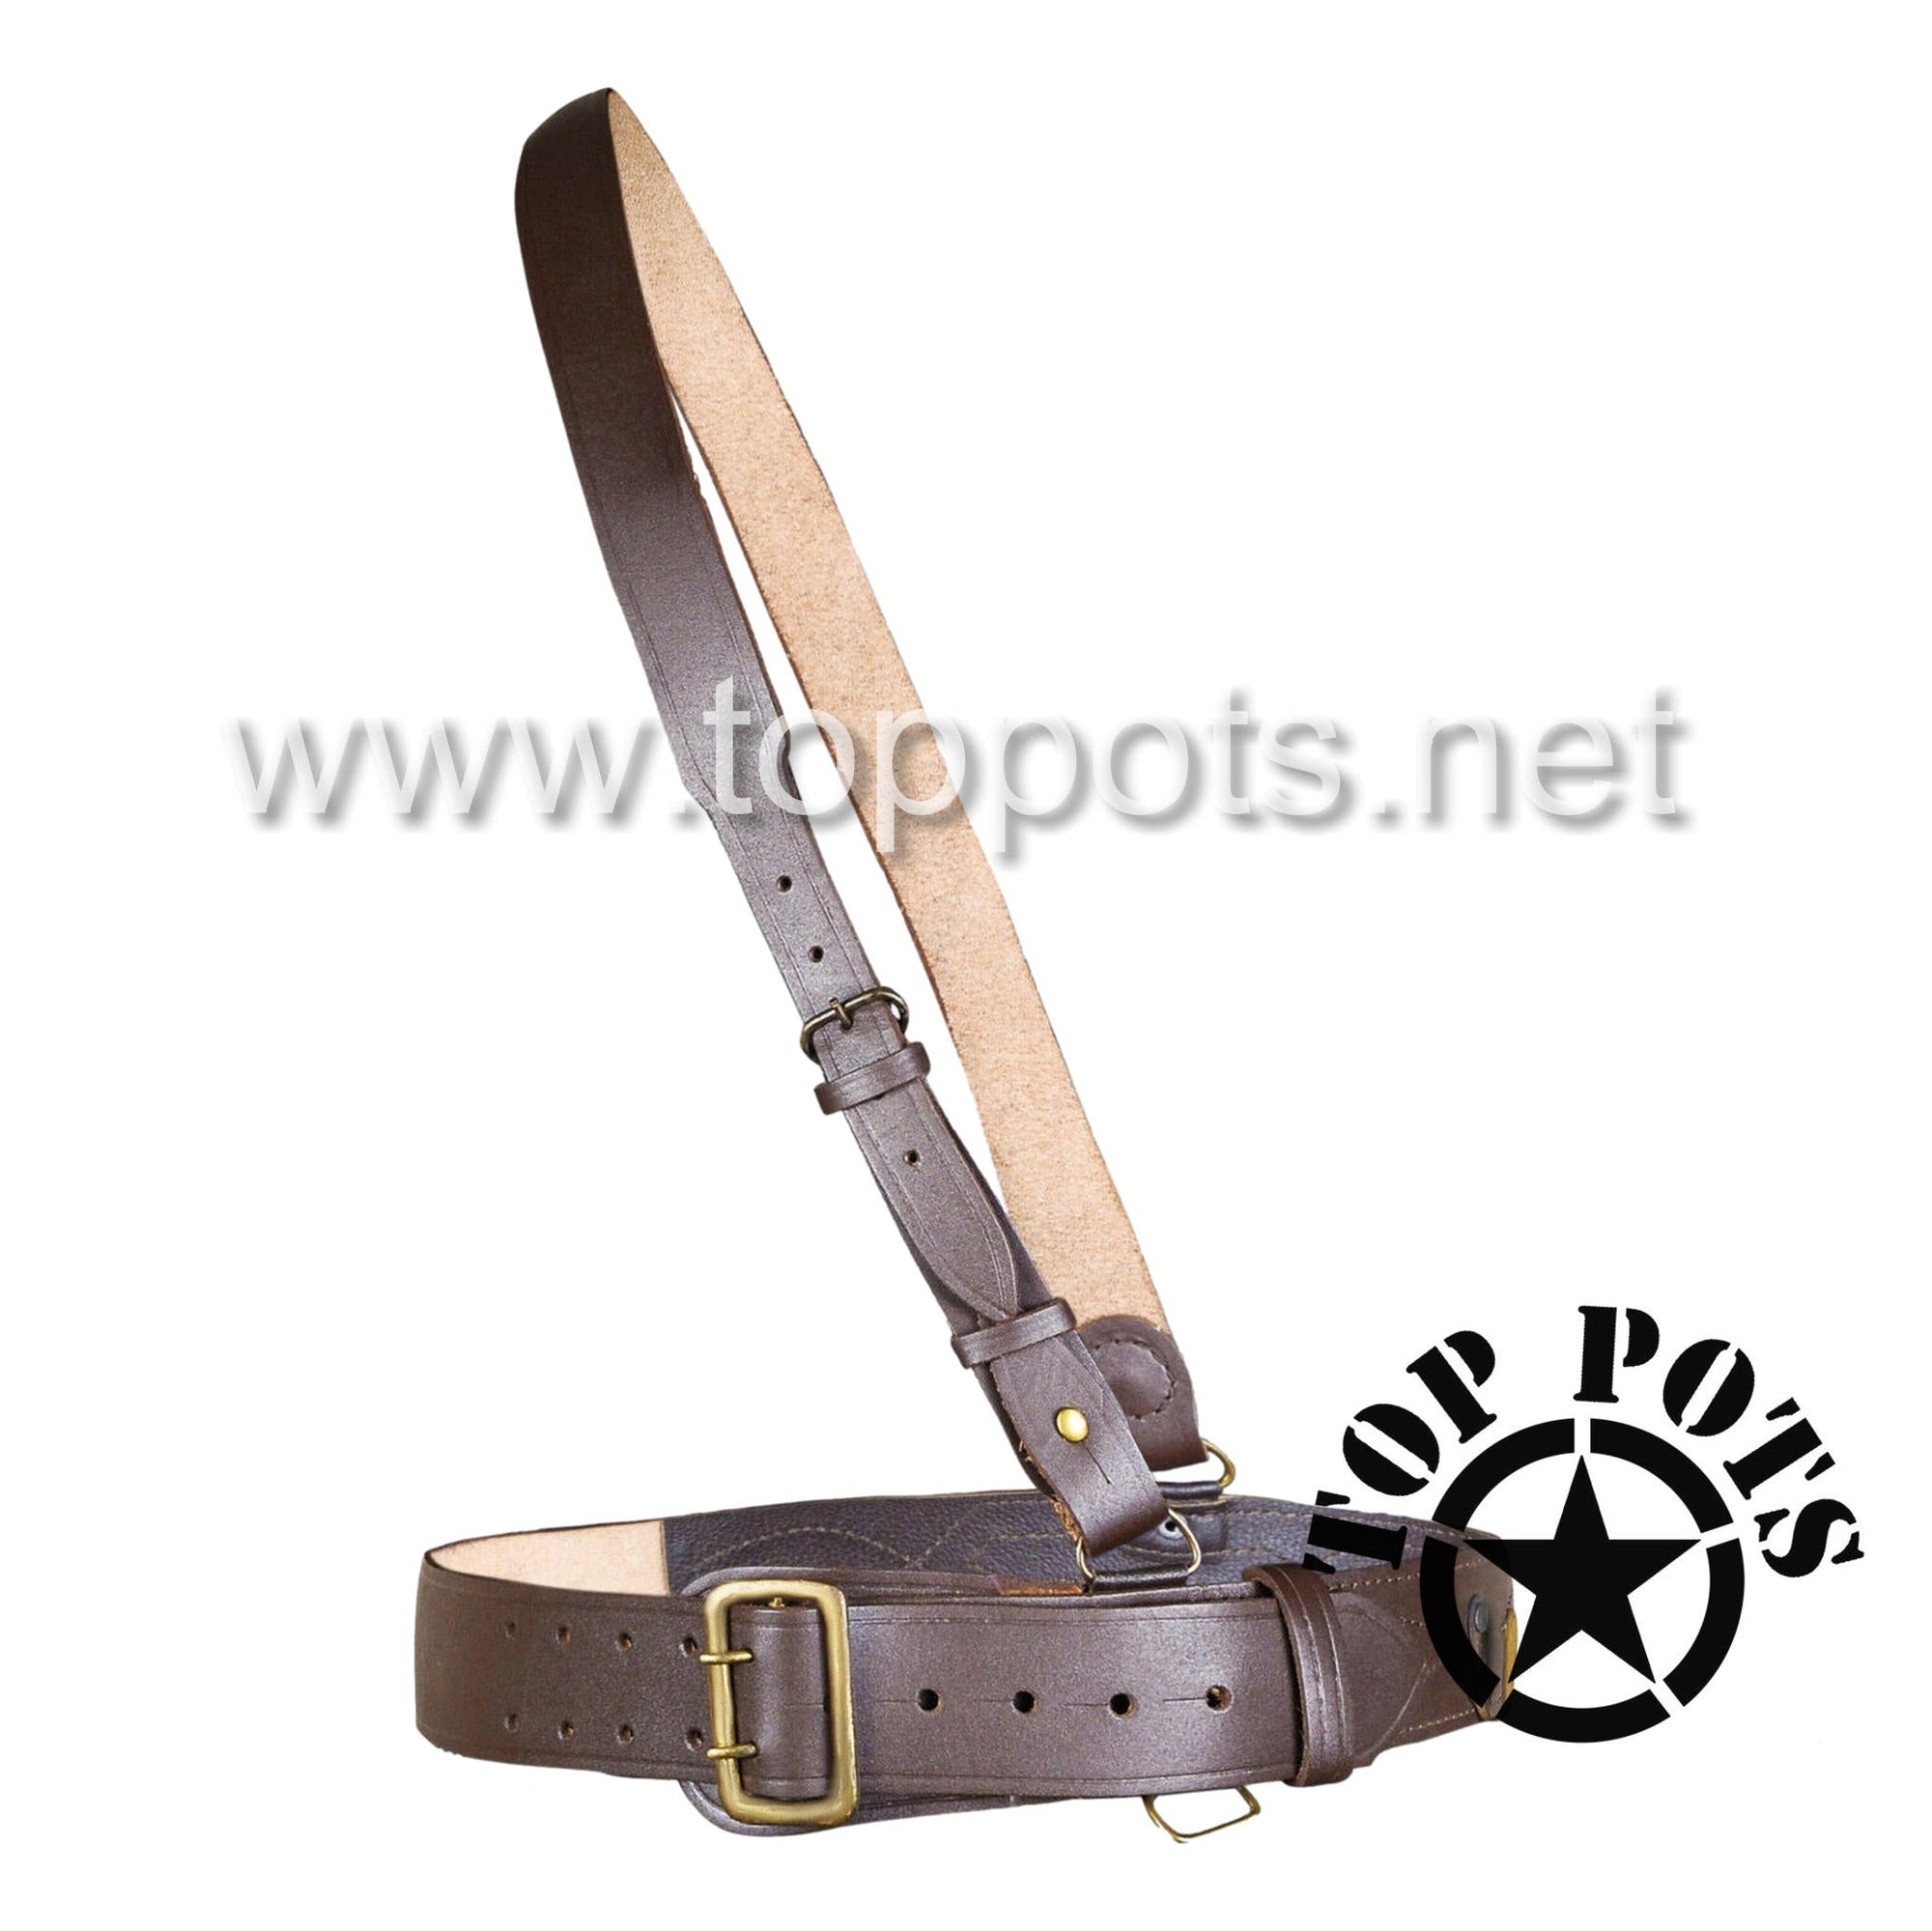 Fort Sill Field Artillery Half Section - WWI US Army Reproduction Leather Officer Sam Browne Belt with Cross Strap and Insignia (3 Pieces)